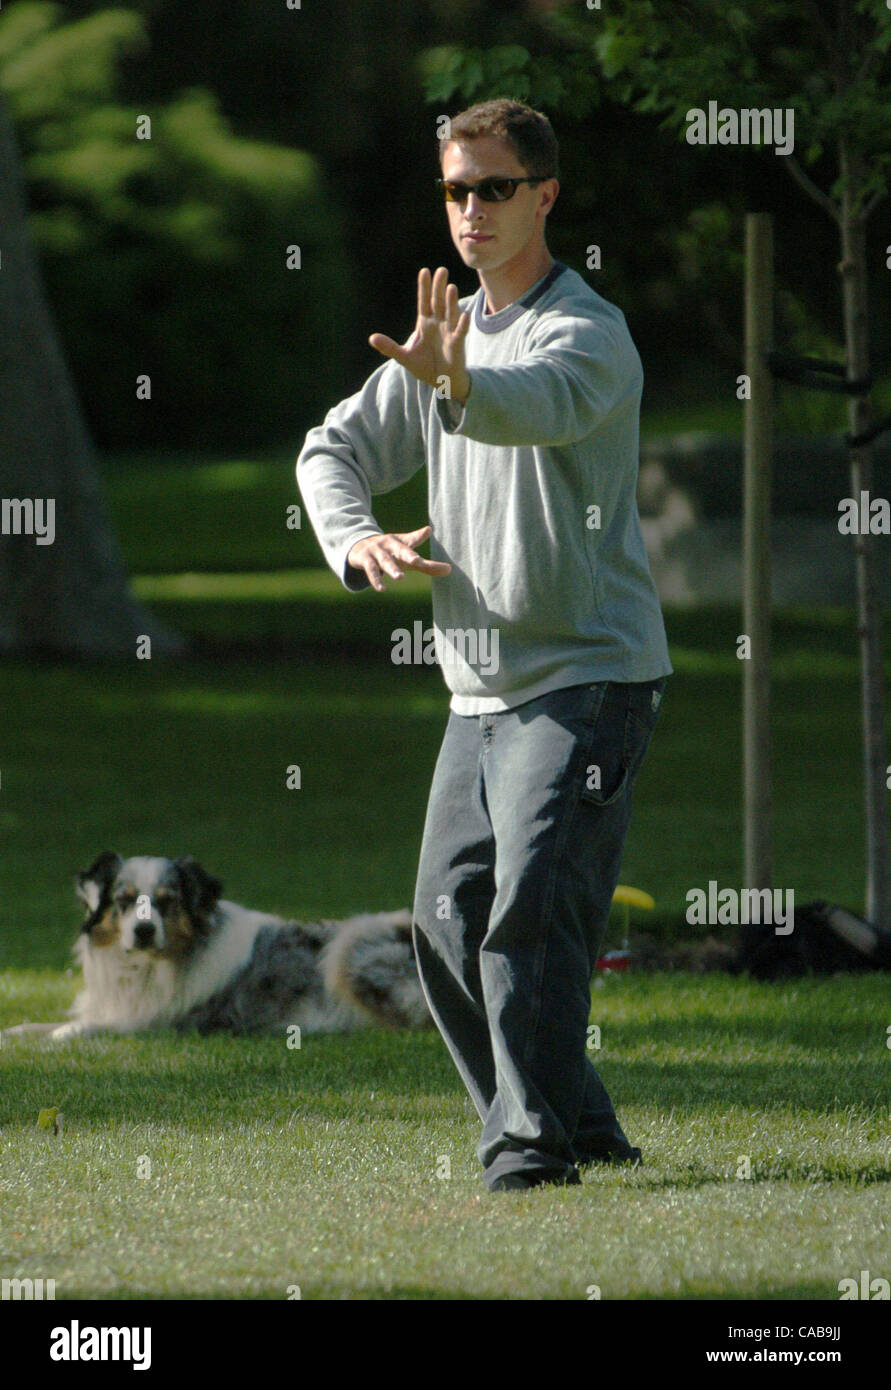 0902--Eric Book, 29, of Walnut Creek works on his technique before a Tai Chi class Thursday, May 20, 2004 at Civic Park in Walnut Creek, Calif.   The class, under the instruction of Jan Diepersloot, drew about 15 students. (FOR 24 HOURS WALNUT CREEK)  (Contra Costa Times/Bob Pepping) Stock Photo